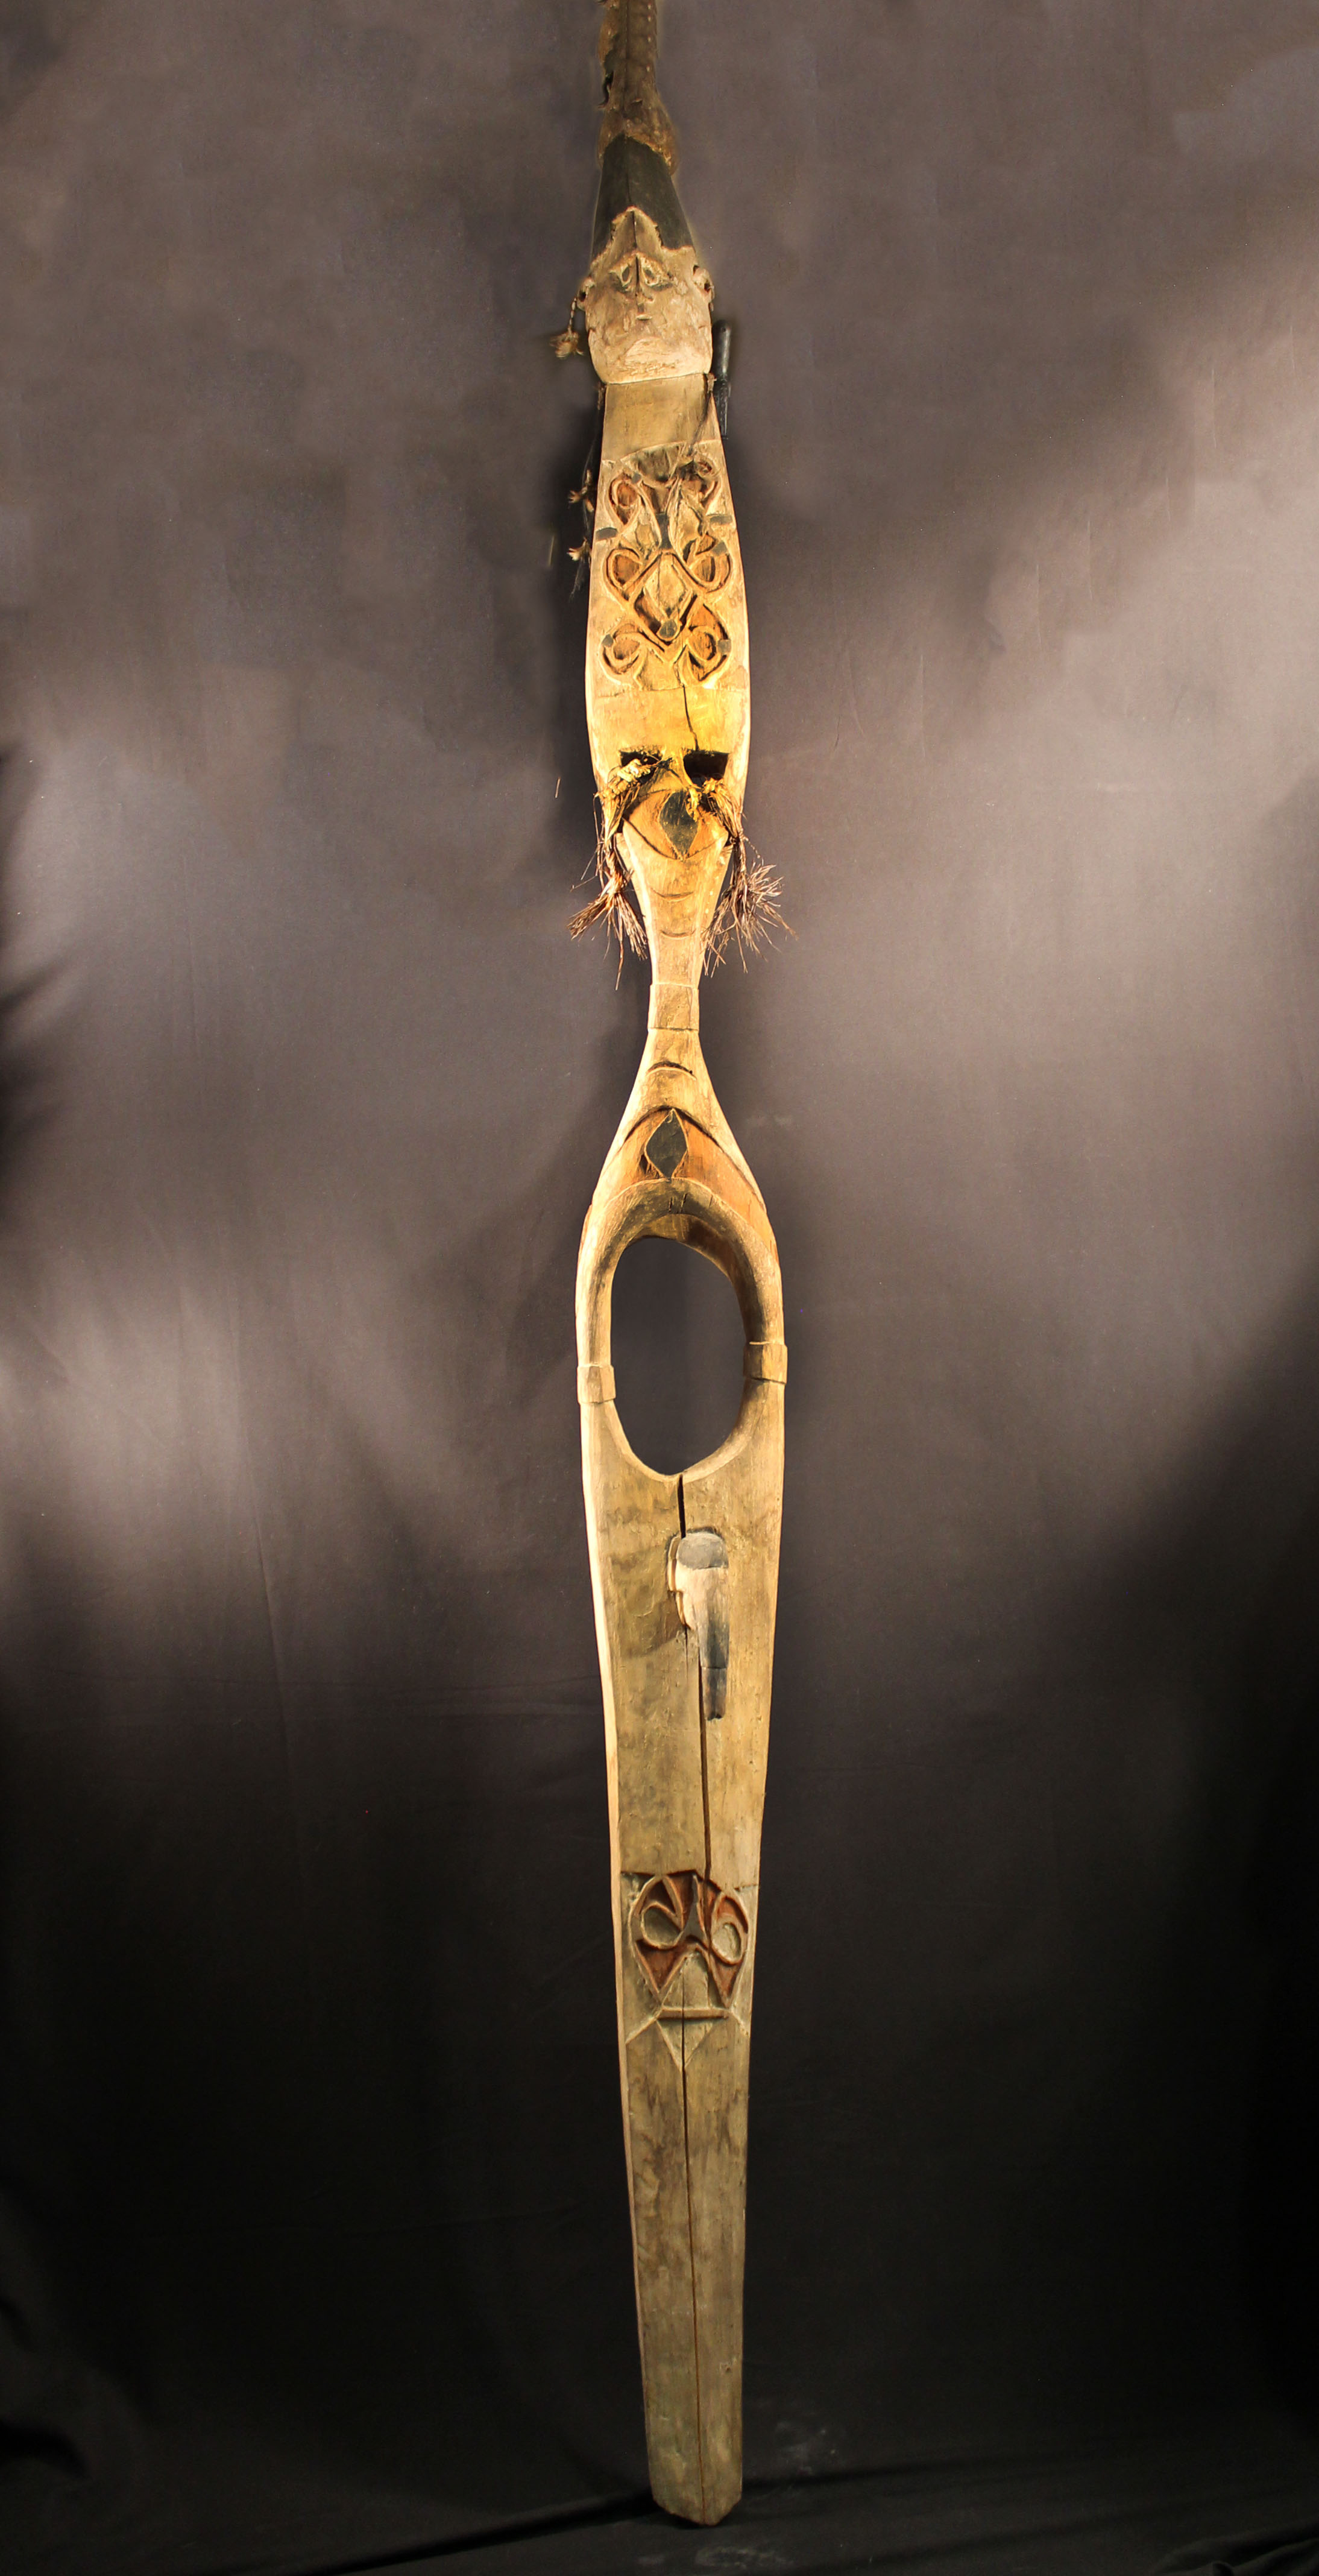 Tall hourglass-shaped wooden carving. The top features an image of a human head with tassels made of leaves, seeds, feathers, and string hanging down. The wood is colored with white, red, and black powders.